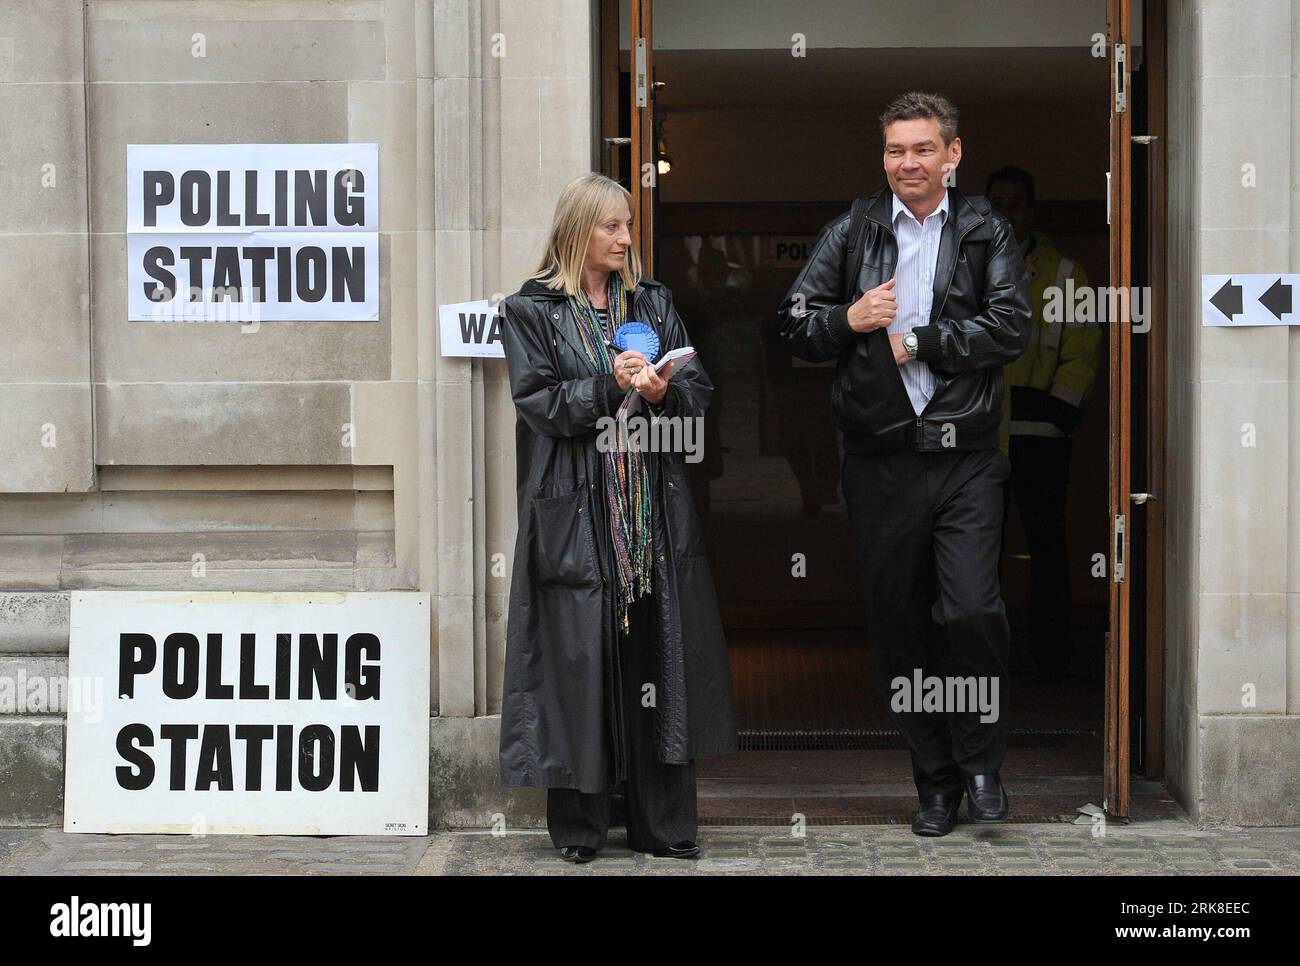 Bildnummer: 54027879  Datum: 06.05.2010  Copyright: imago/Xinhua  A man leaves a polling station after casting his vote in London, capital of Britain, May 6, 2010. Millions of in Britain went to polls on Thursday morning as up to 50,000 polling stations across the country opened for ballots. (Xinhua/Wu Wei) (msq) BRITAIN-ELECTION-VOTE PUBLICATIONxNOTxINxCHN Politik Grossbritannien Wahlen premiumd xint kbdig xcb 2010 quer o00 Wahllokal    Bildnummer 54027879 Date 06 05 2010 Copyright Imago XINHUA a Man Leaves a Polling Station After Casting His VOTE in London Capital of Britain May 6 2010 Milli Stock Photo